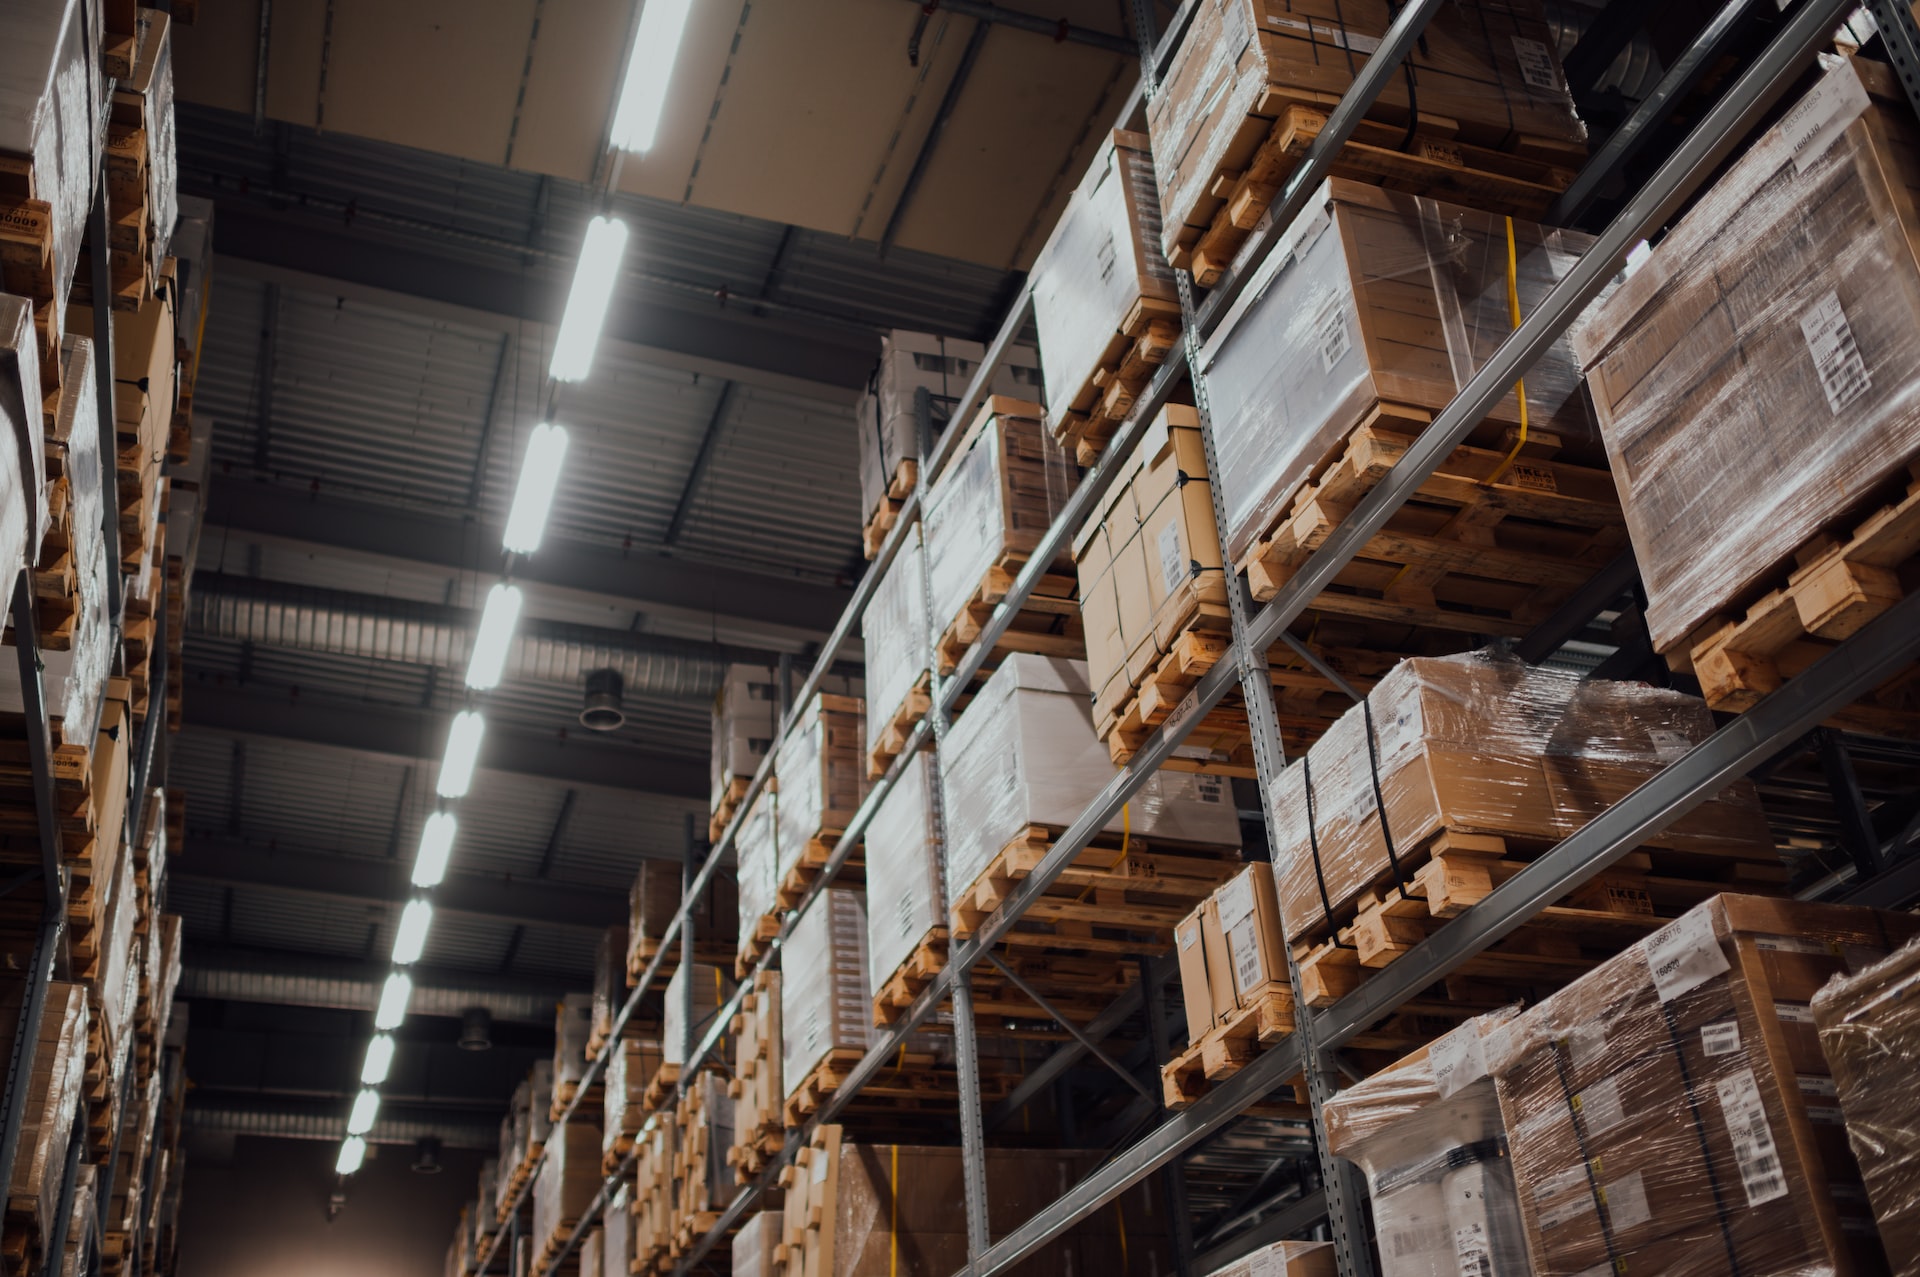 Inventory management with Odoo can help you keep track of your inventory